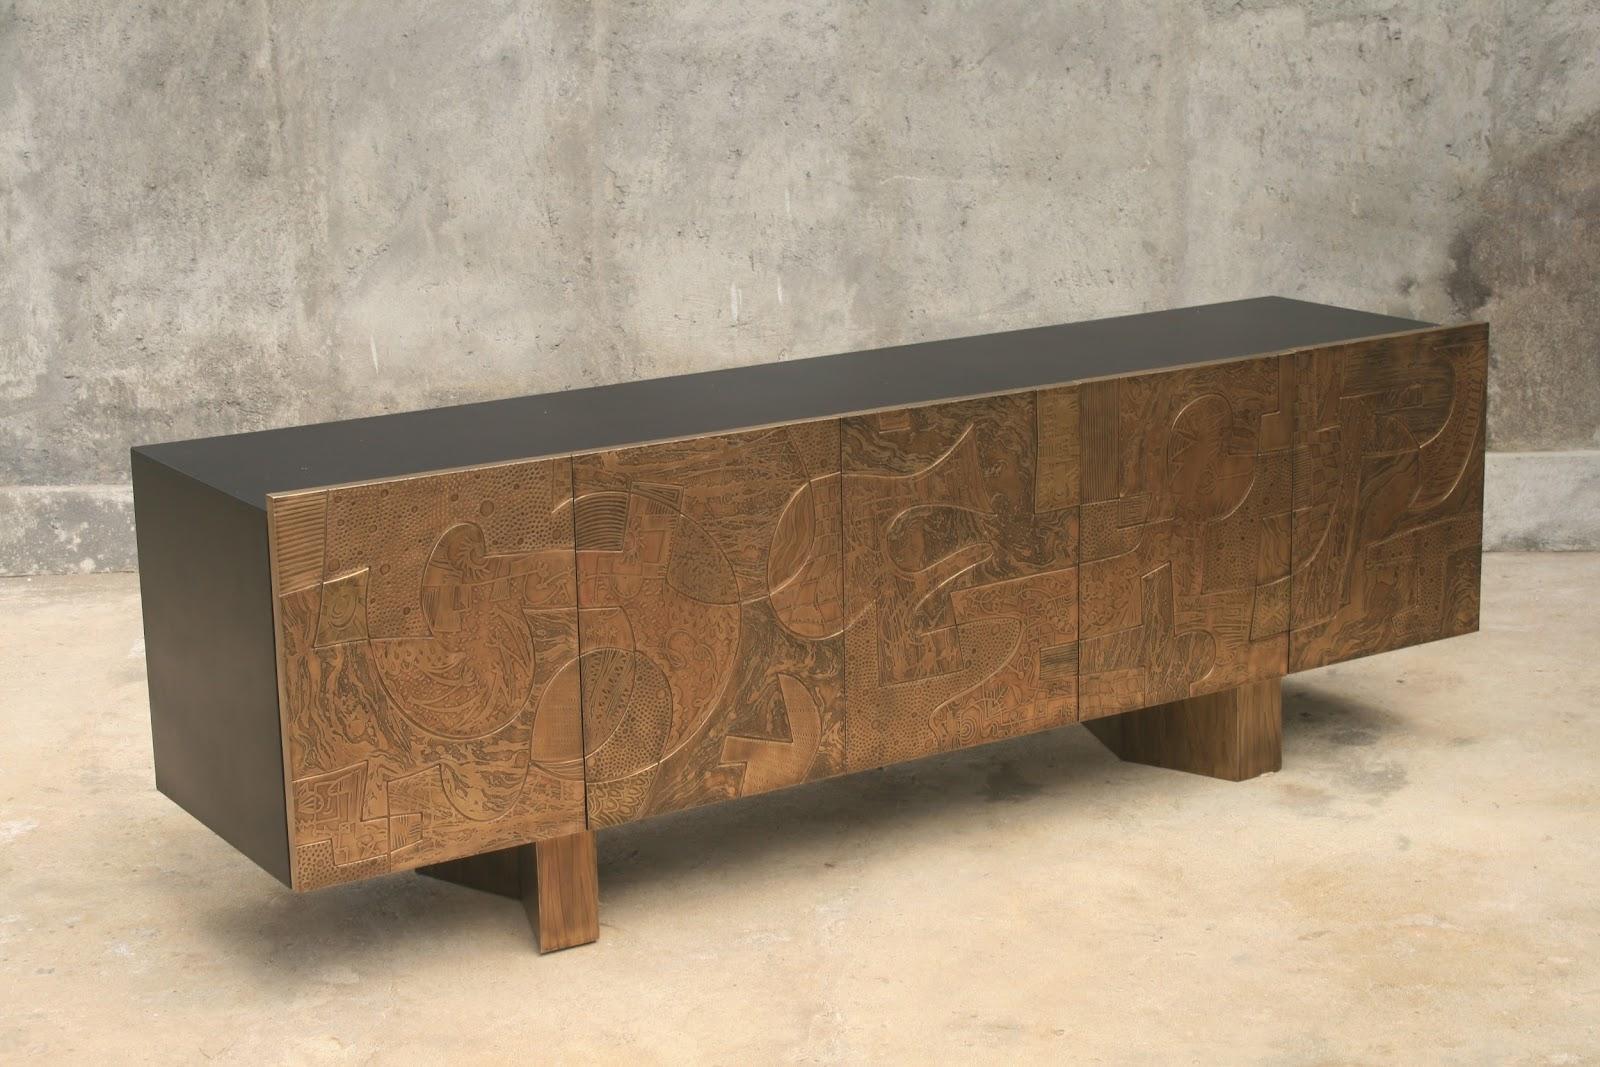 Front Plated in Acid-Etched Copper 5D Cabinet by Brutalist Be
One Of A Kind.
Dimensions: D 55 x W 240 x H 70 cm.
Materials: Copper and black lacquered wood.

This exclusive sideboard is hand-made of copper, carefully selected and then shaped by